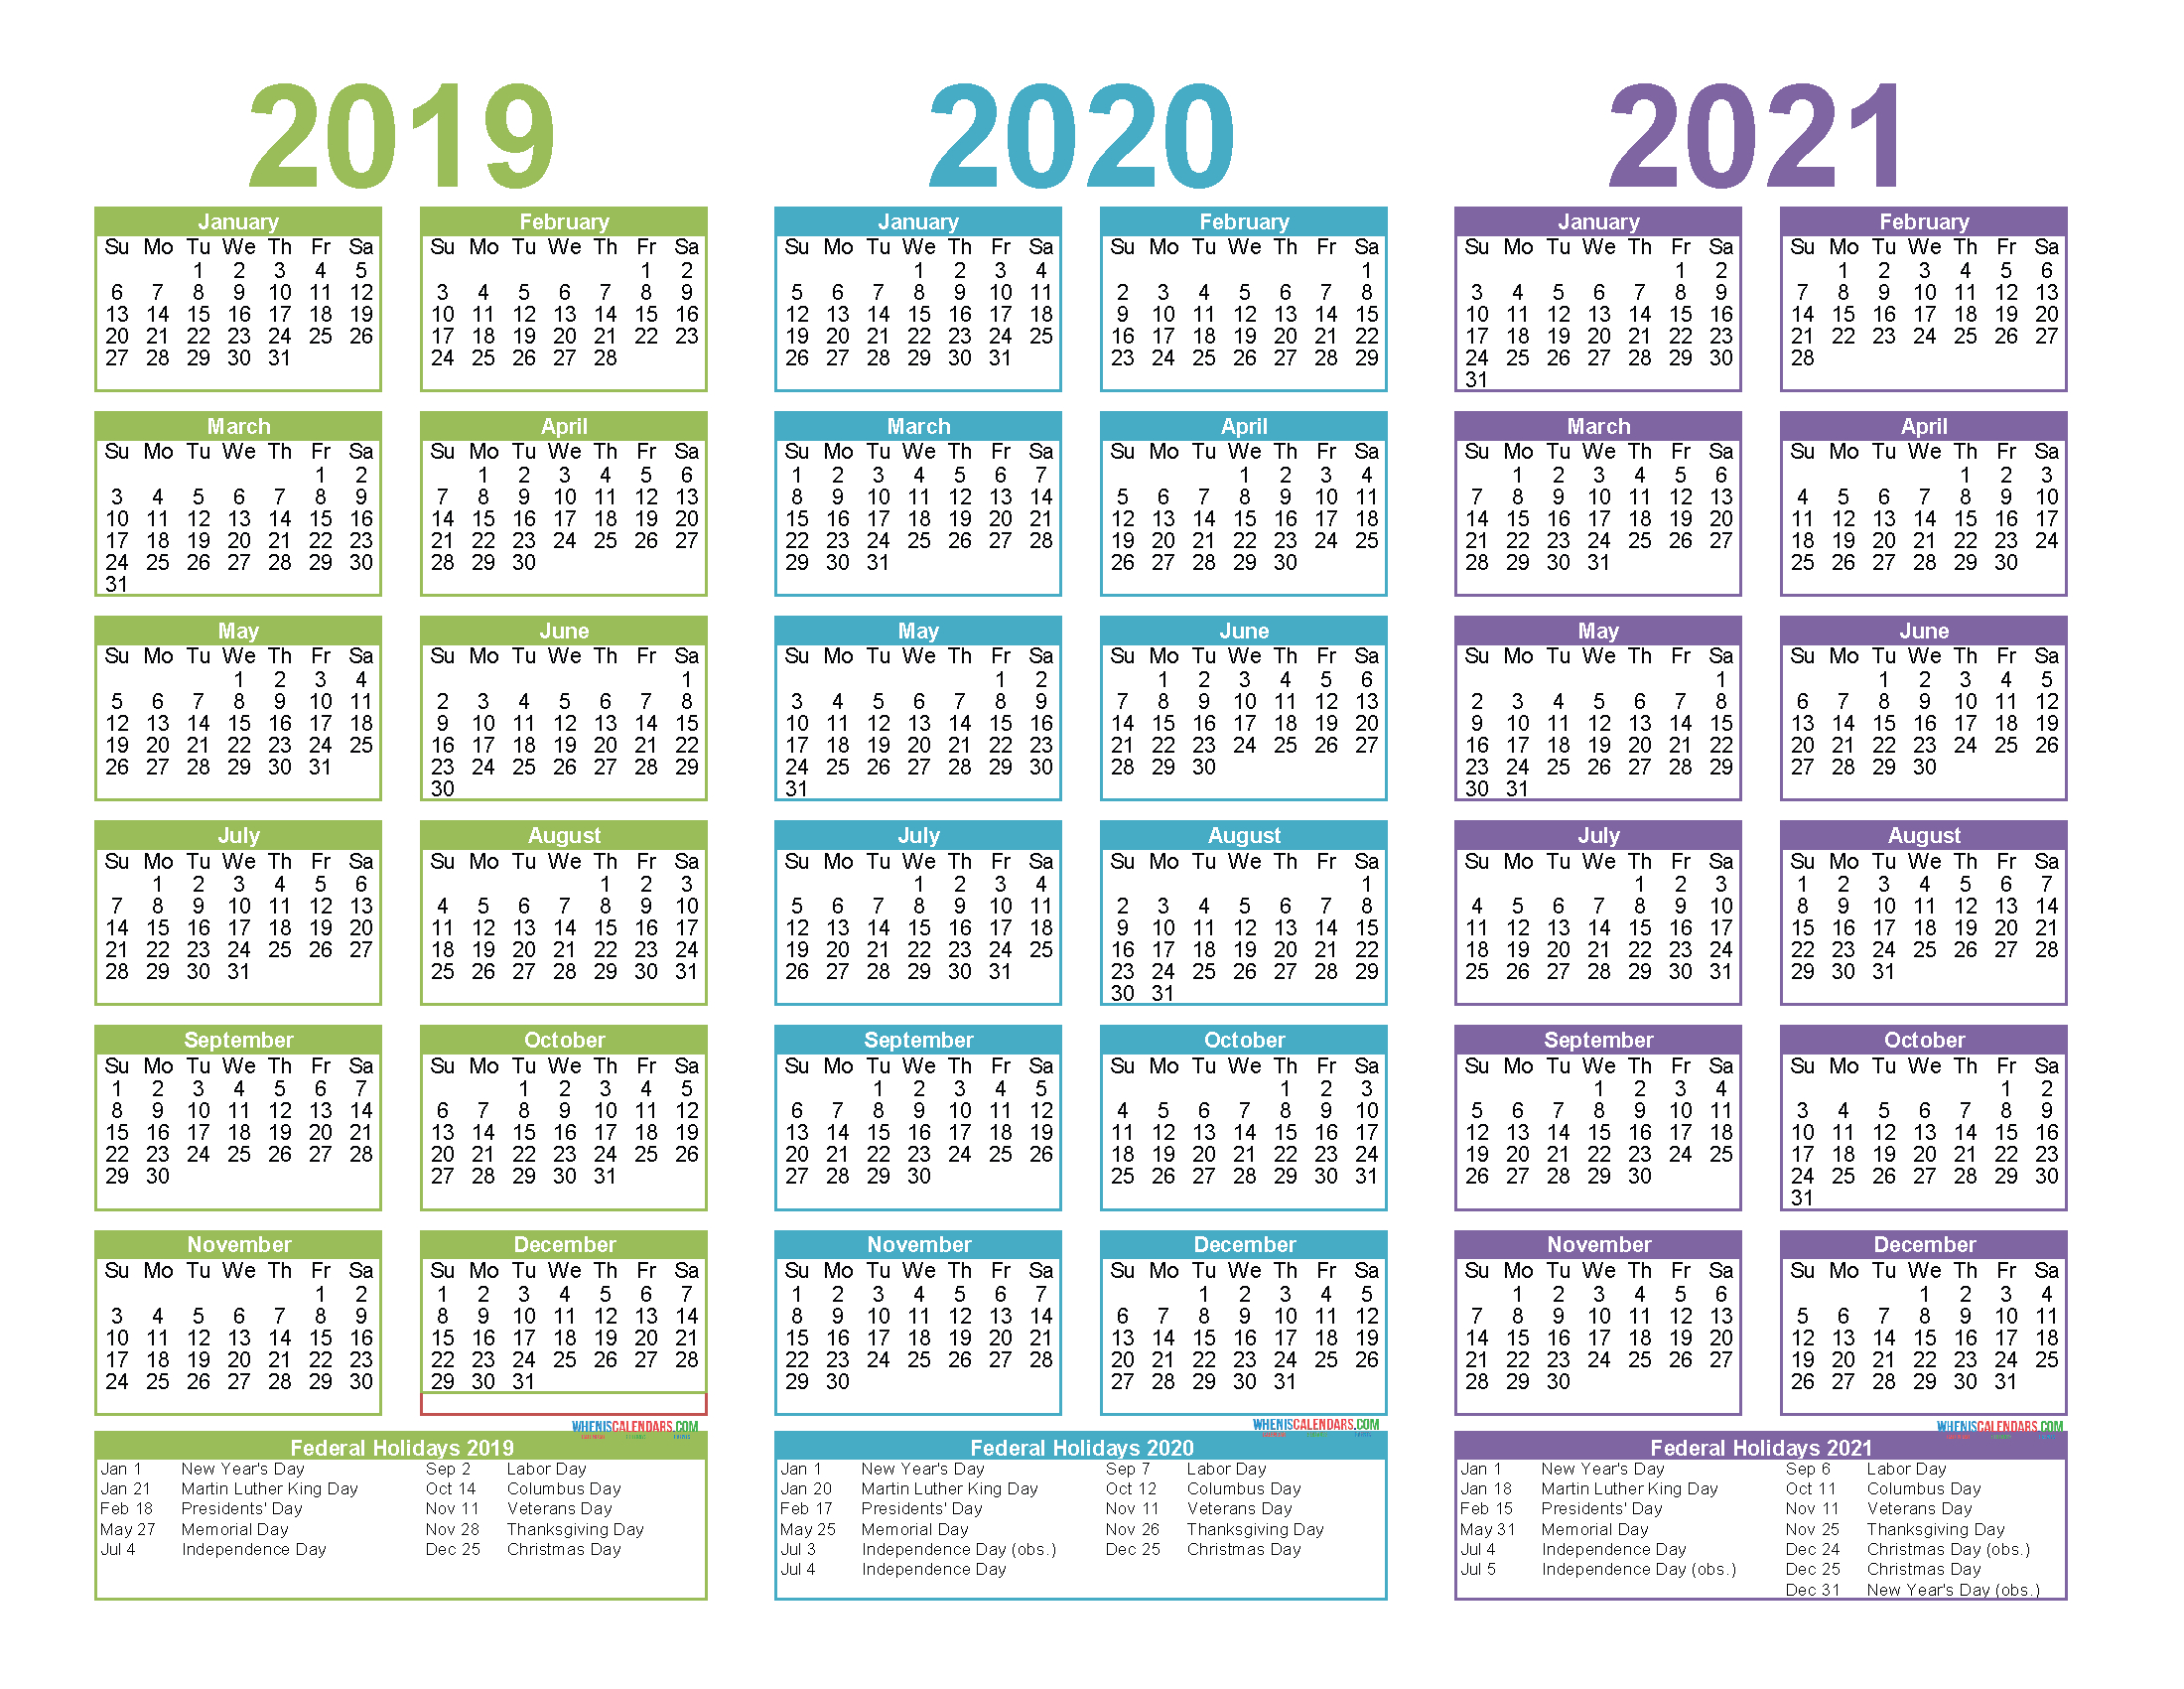 2019 To 2021 3 Year Calendar Printable Free Pdf, Word, Image intended for 3 Month Printable Calendar 2021